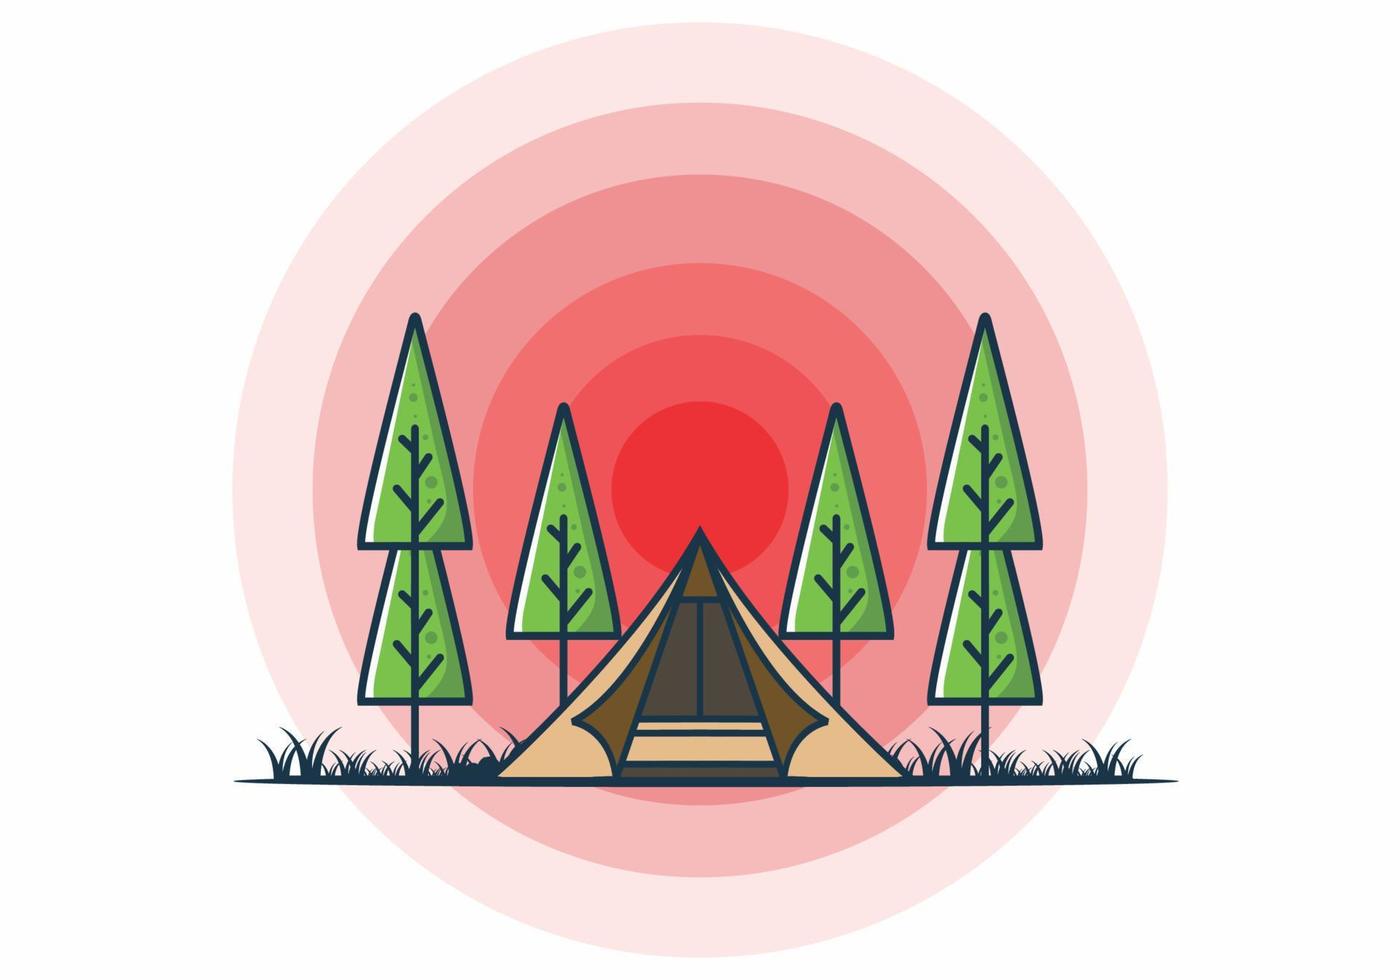 tente triangle camping illustration plate vecteur